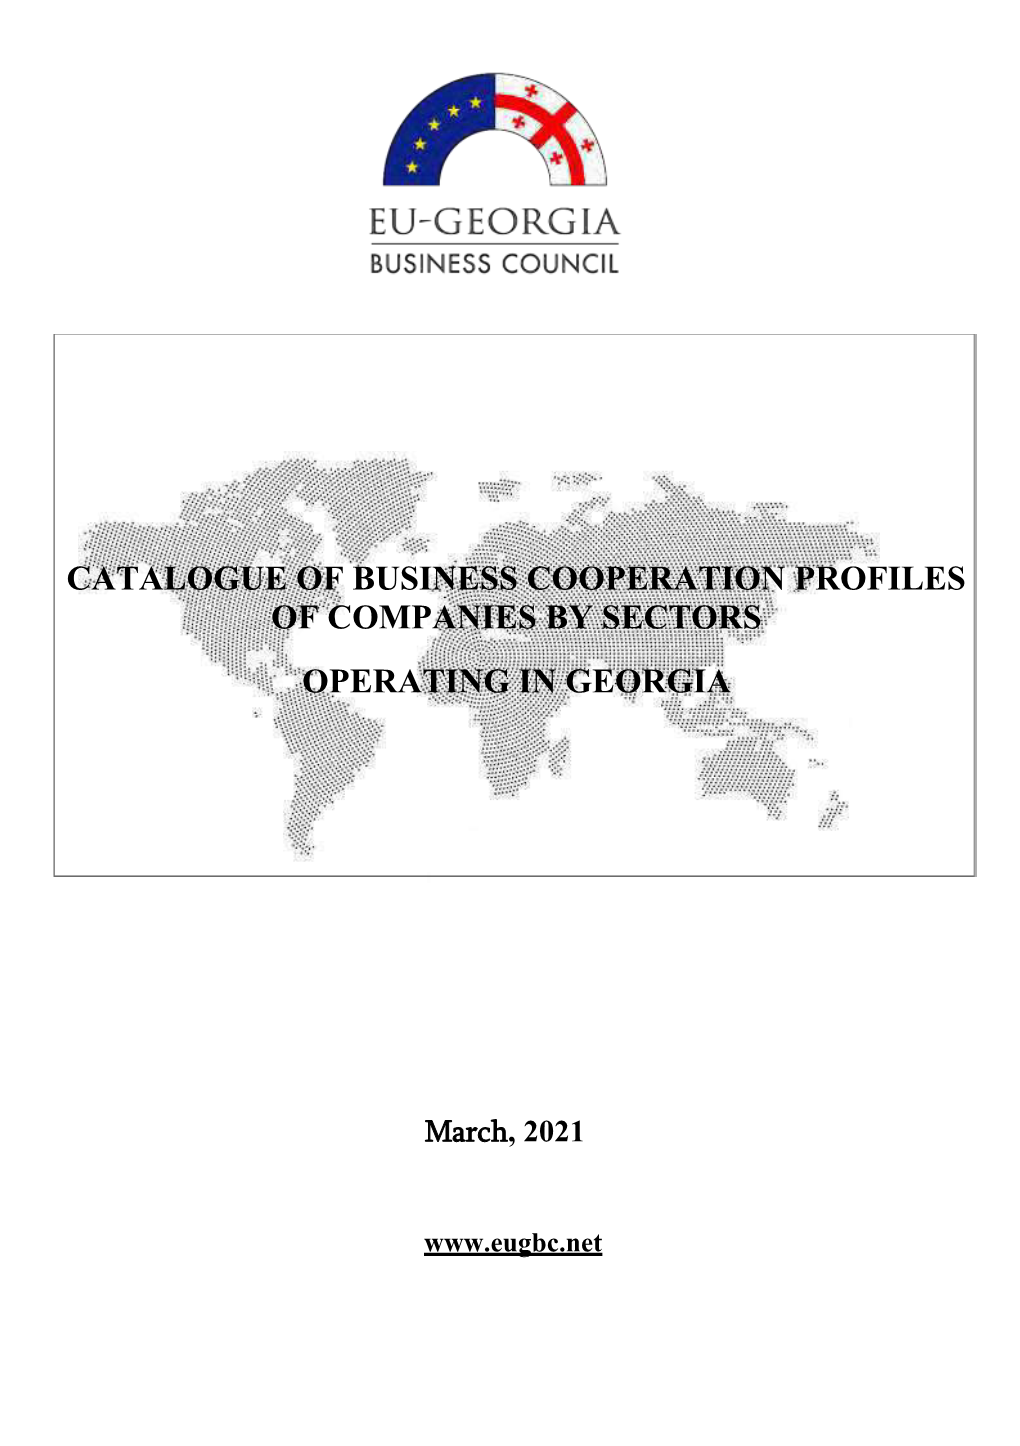 Catalogue of Business Cooperation Profiles of Companies by Sectors Operating in Georgia